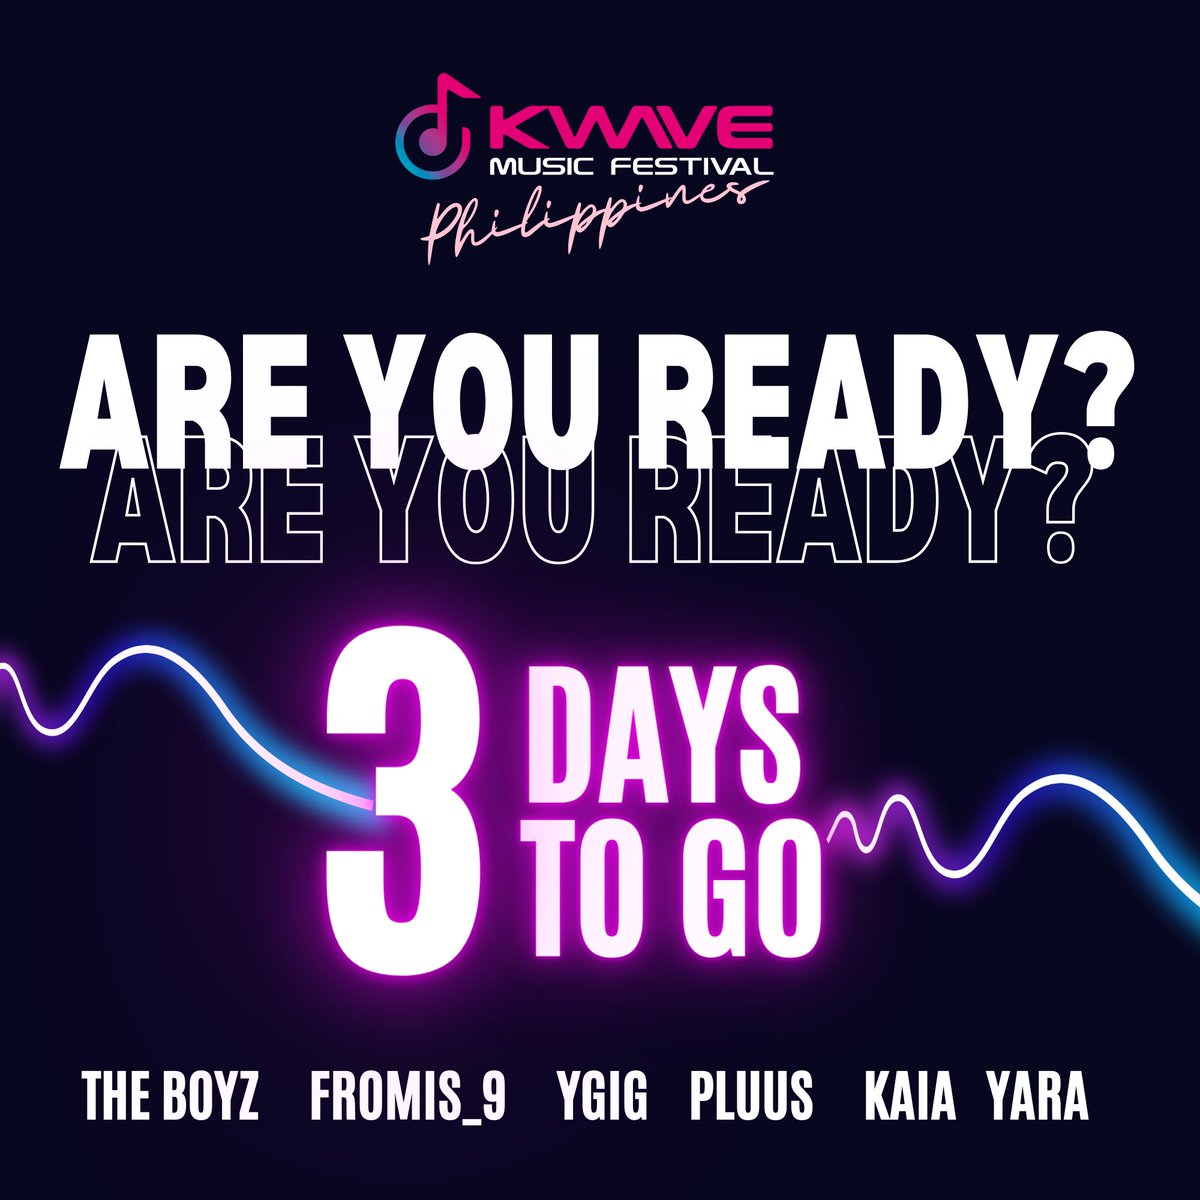 'Tick-tock, the excitement is building! Only 3 days stand between us and KWAVE Philippines!

#THEBOYZ #fromis_9 #PLUUS #YGIG #YARA #KAIA #KWAVEPH #AbsolutelyLibre #KWAVEMusicFestival #BadmintonAsia #KWAVE